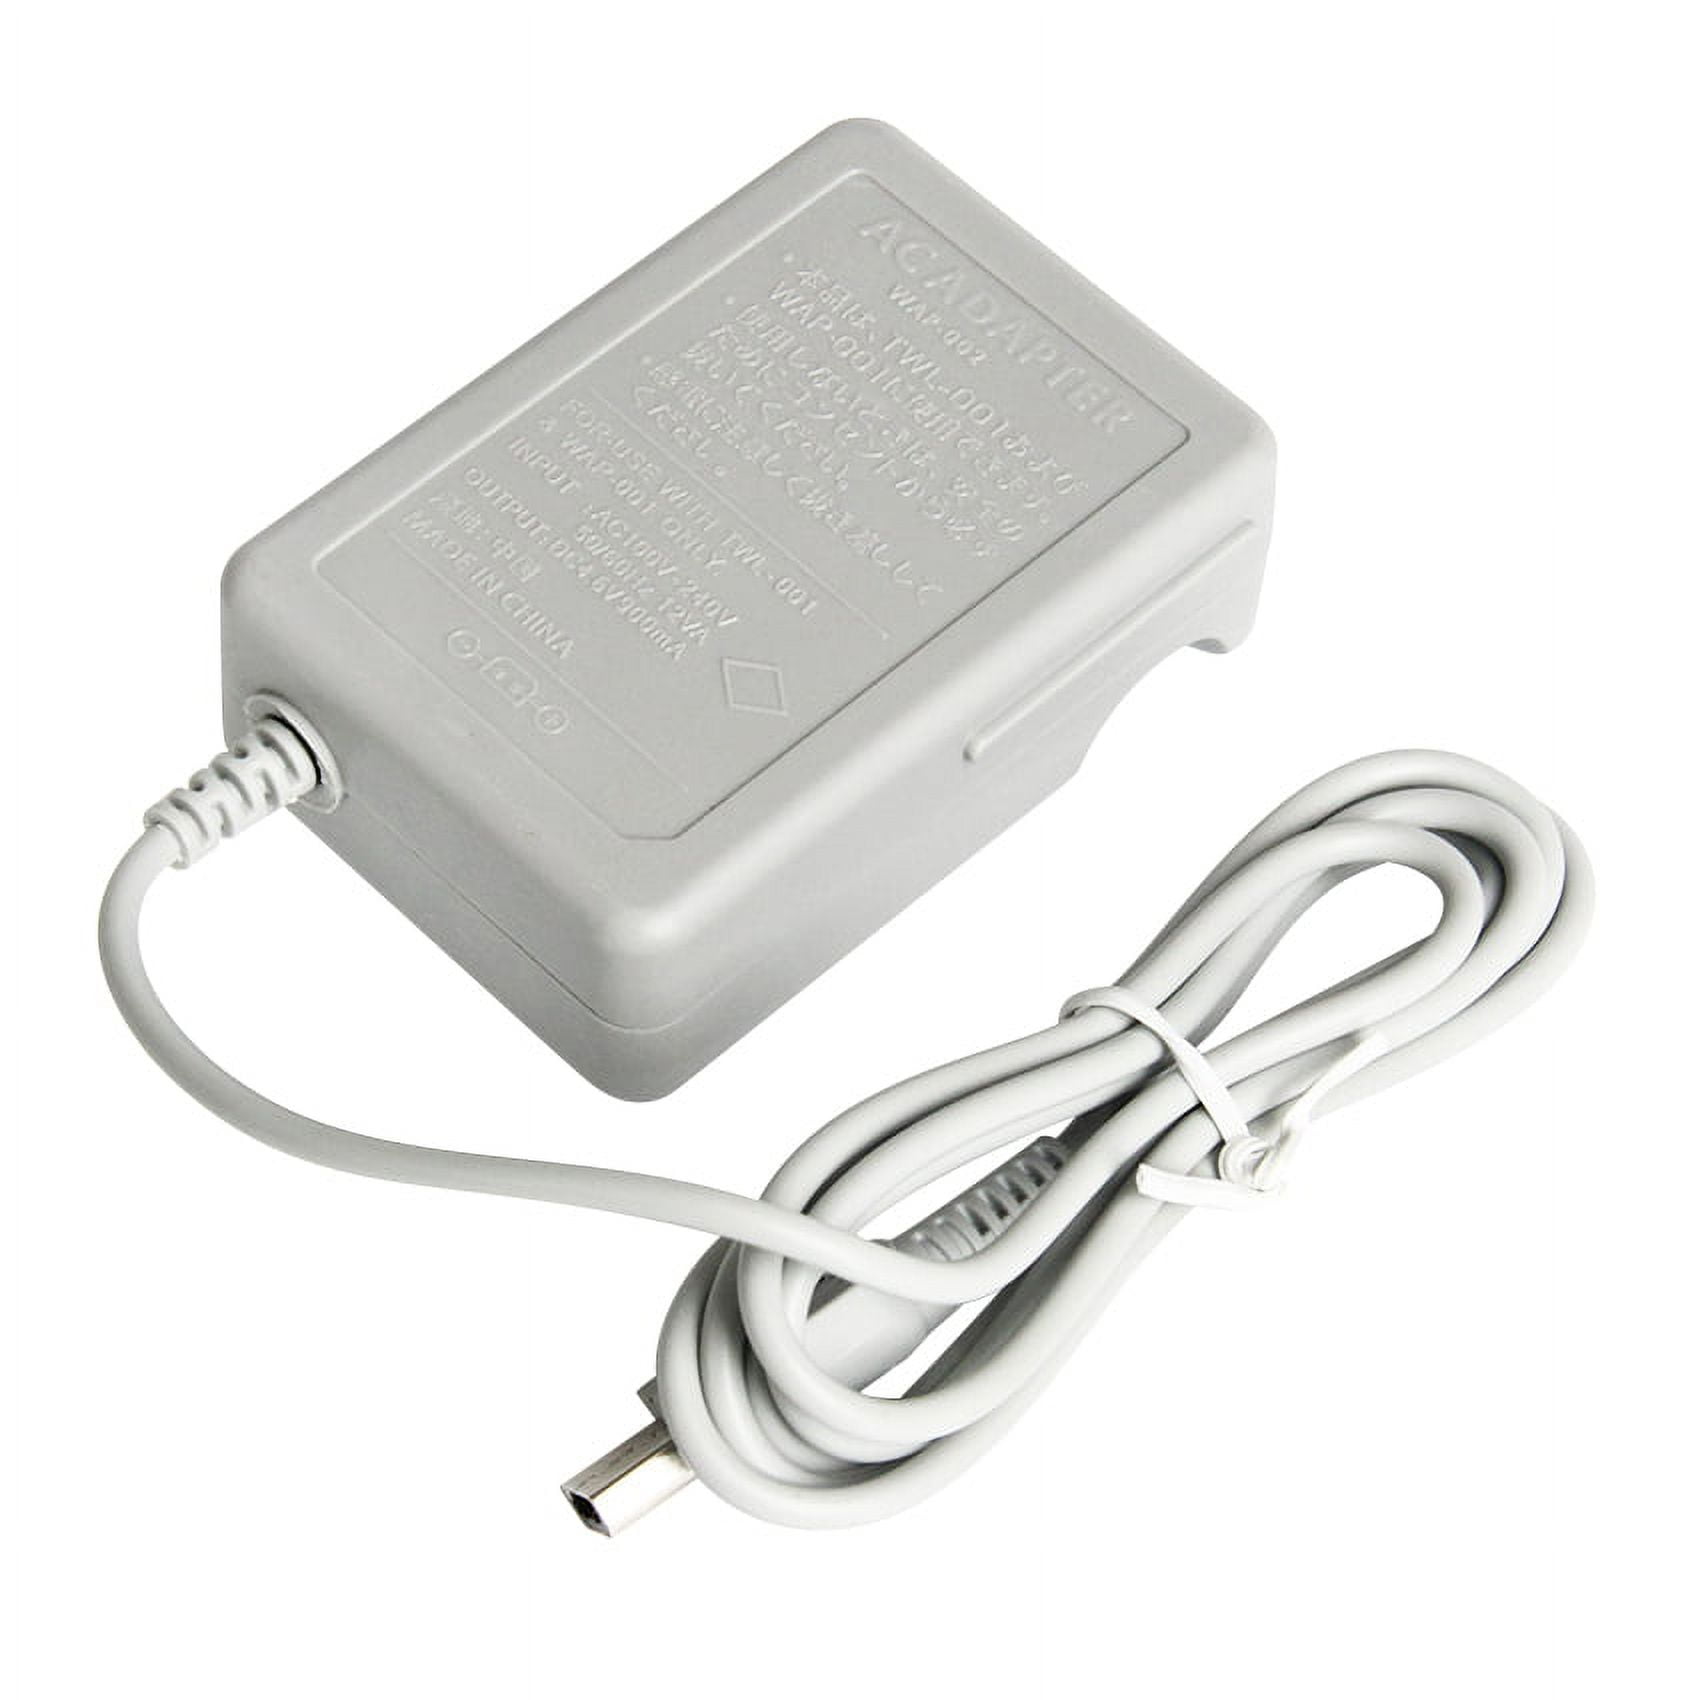 FOX MICRO Nintendo DSi/XL/3DS/3DS XL Power Supply Adapter/Charger Gaming  Adapter - FOX MICRO 